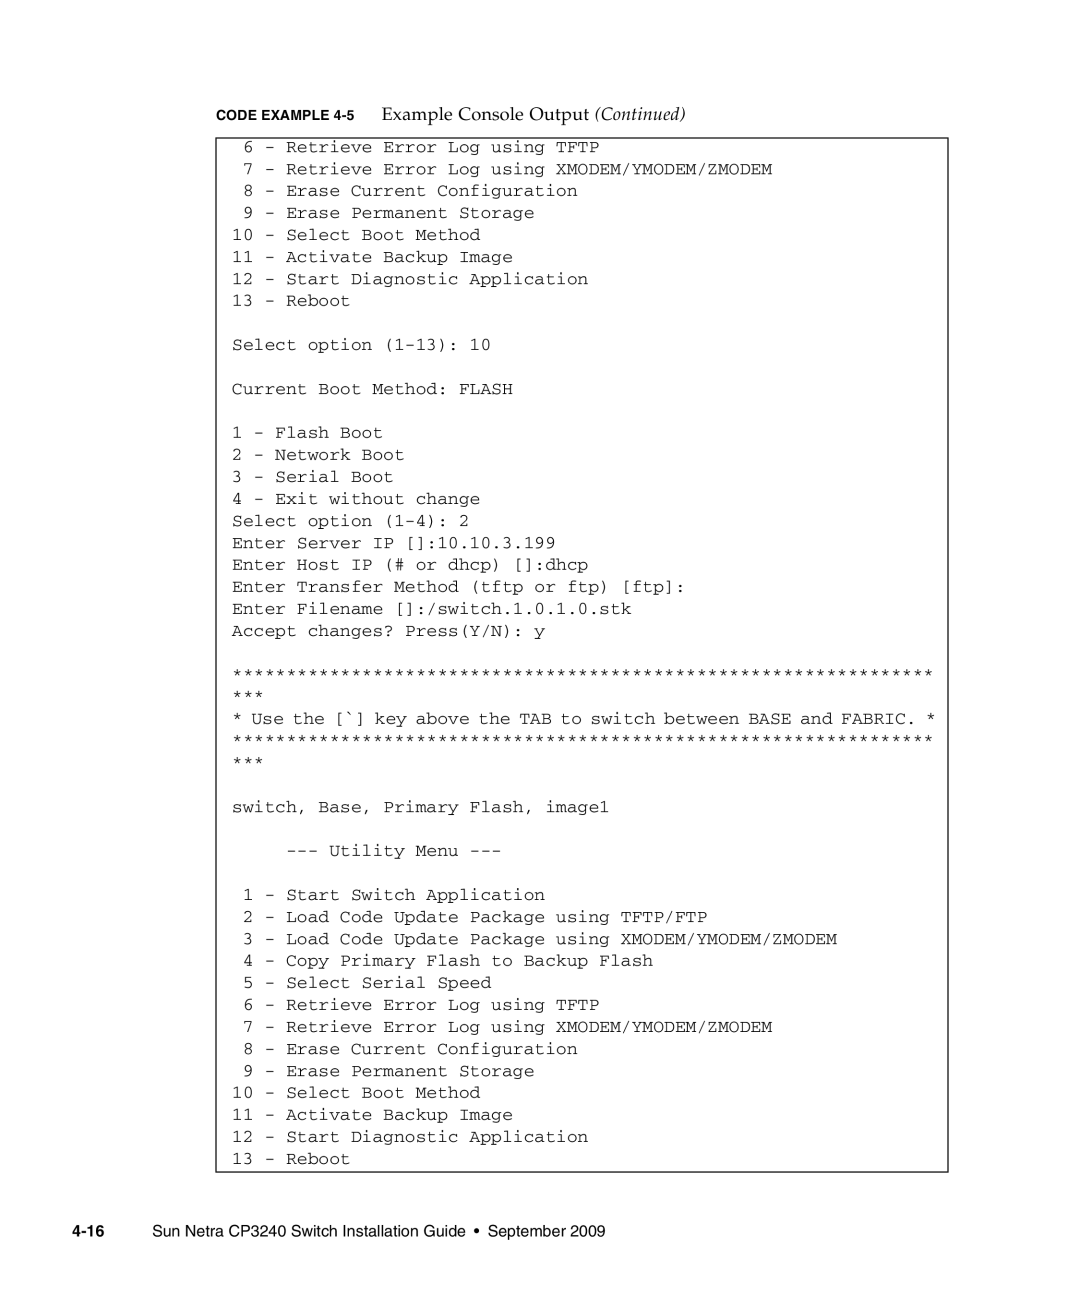 Sun Microsystems CP3240 manual CODE EXAMPLE 4-5 Example Console Output Continued 